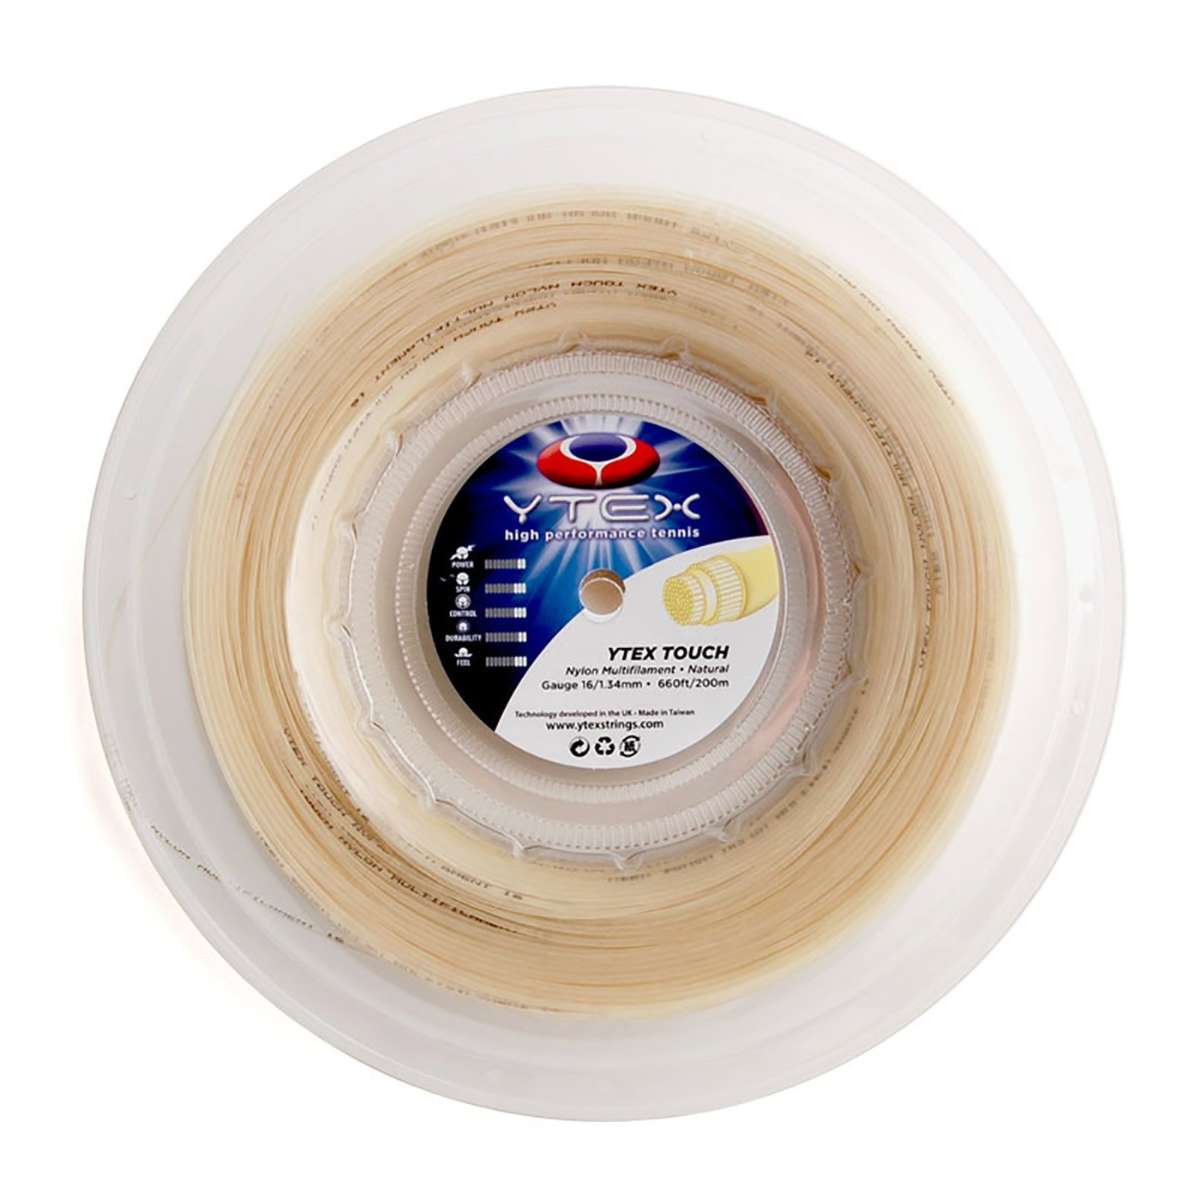 Ytex Touch Nylon Multifilament, 16, Natural Color, 200 M. Strings YTech Touch Nylon Und.